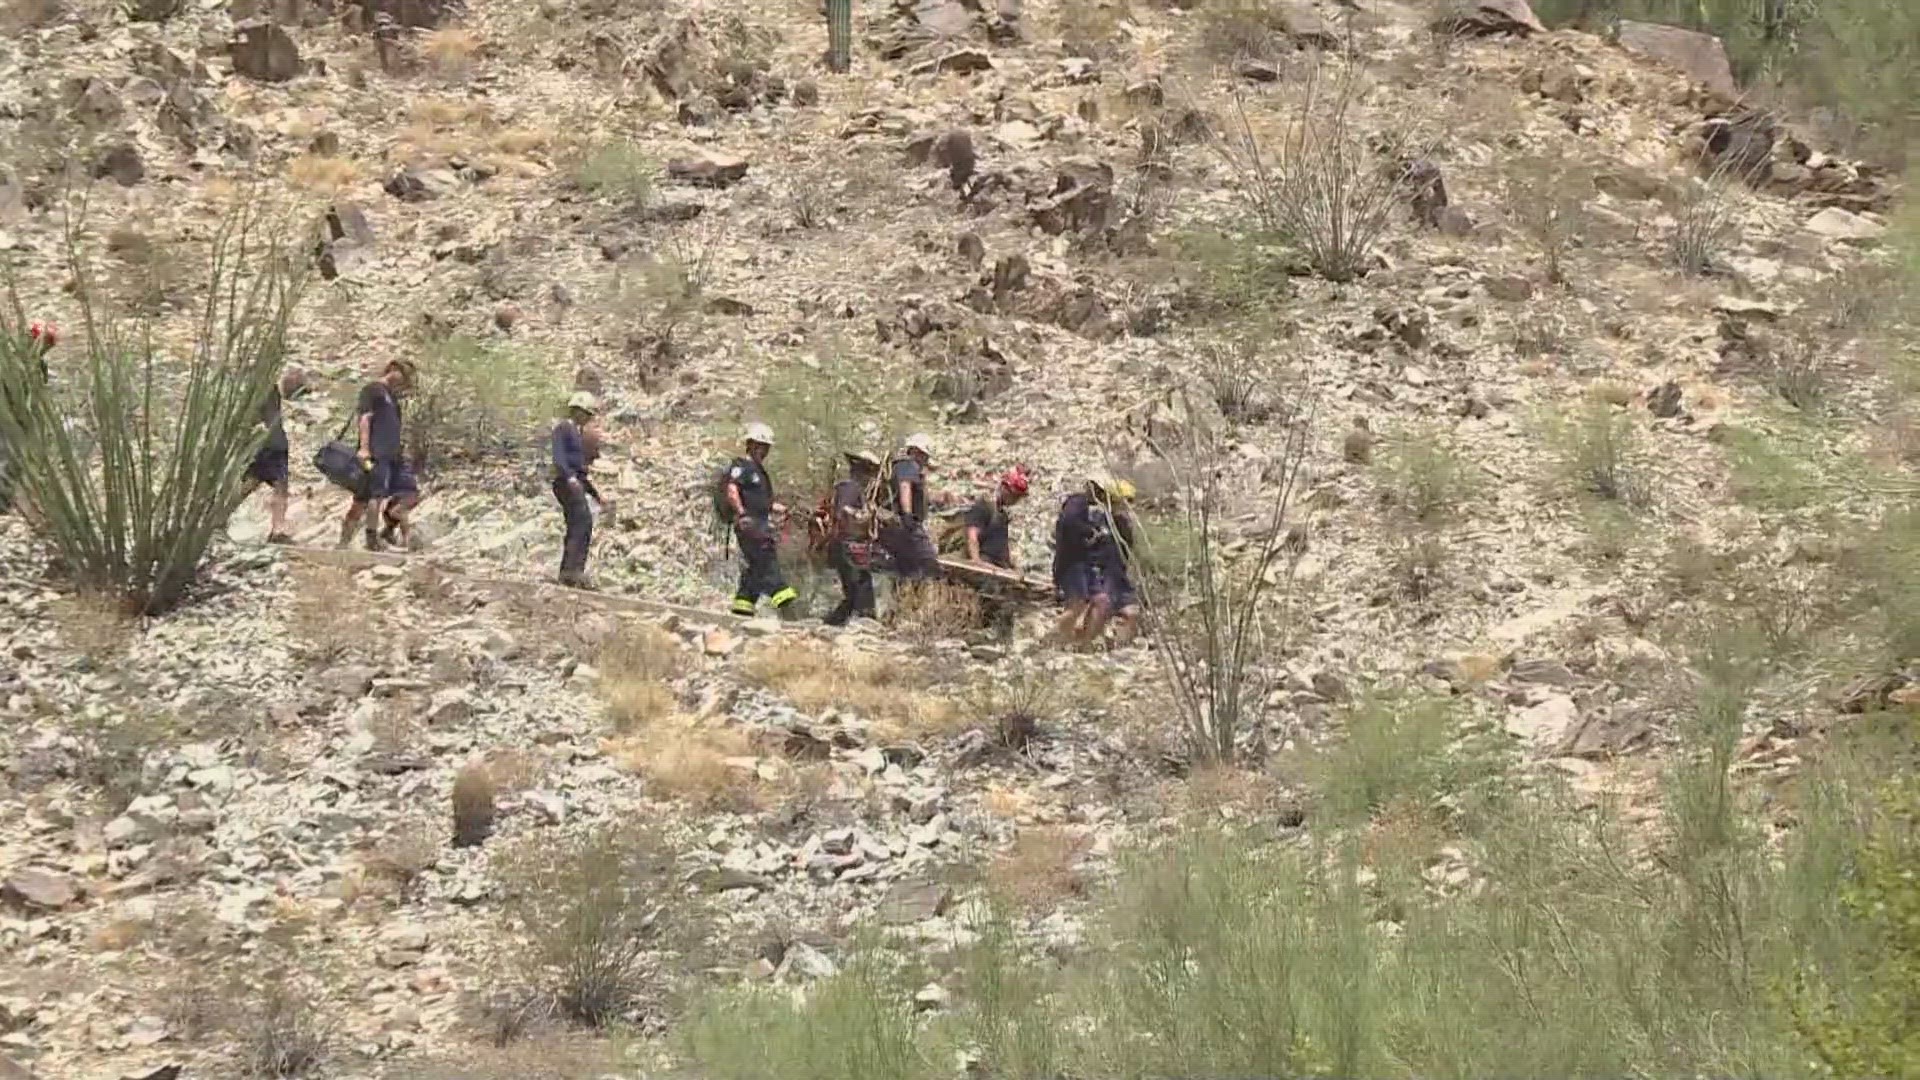 A man with two dogs was rescued from Piestewa Peak Wednesday after suffering a heat-related emergency. One of the dogs did not survive, officials said.